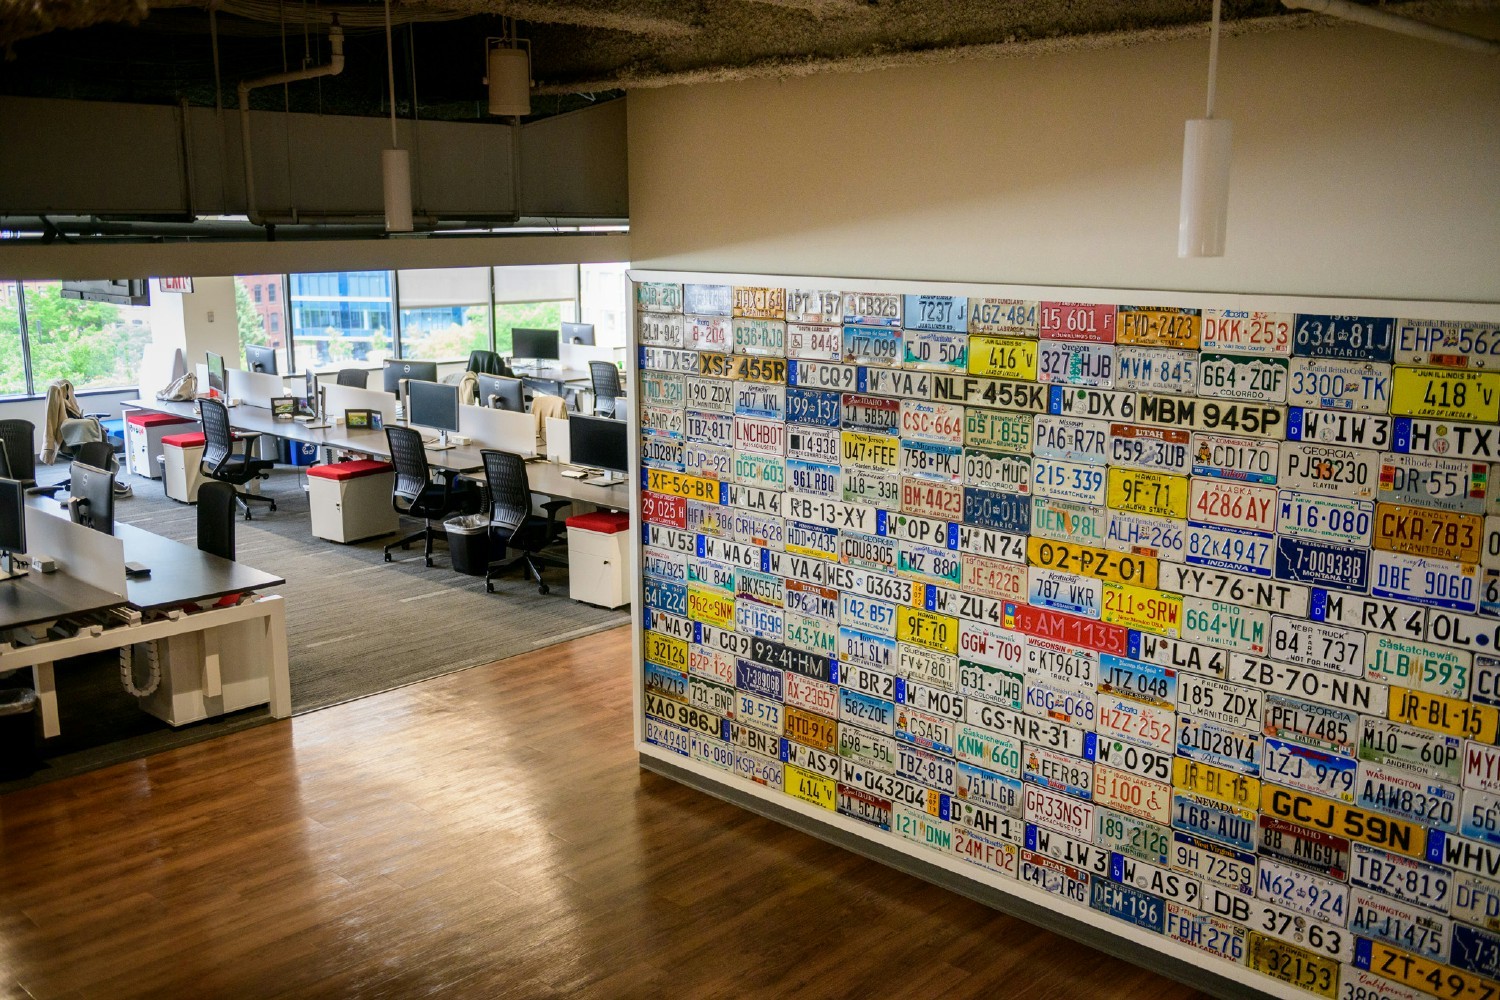 CarGurus' offices are designed to inspire creativity and collaboration